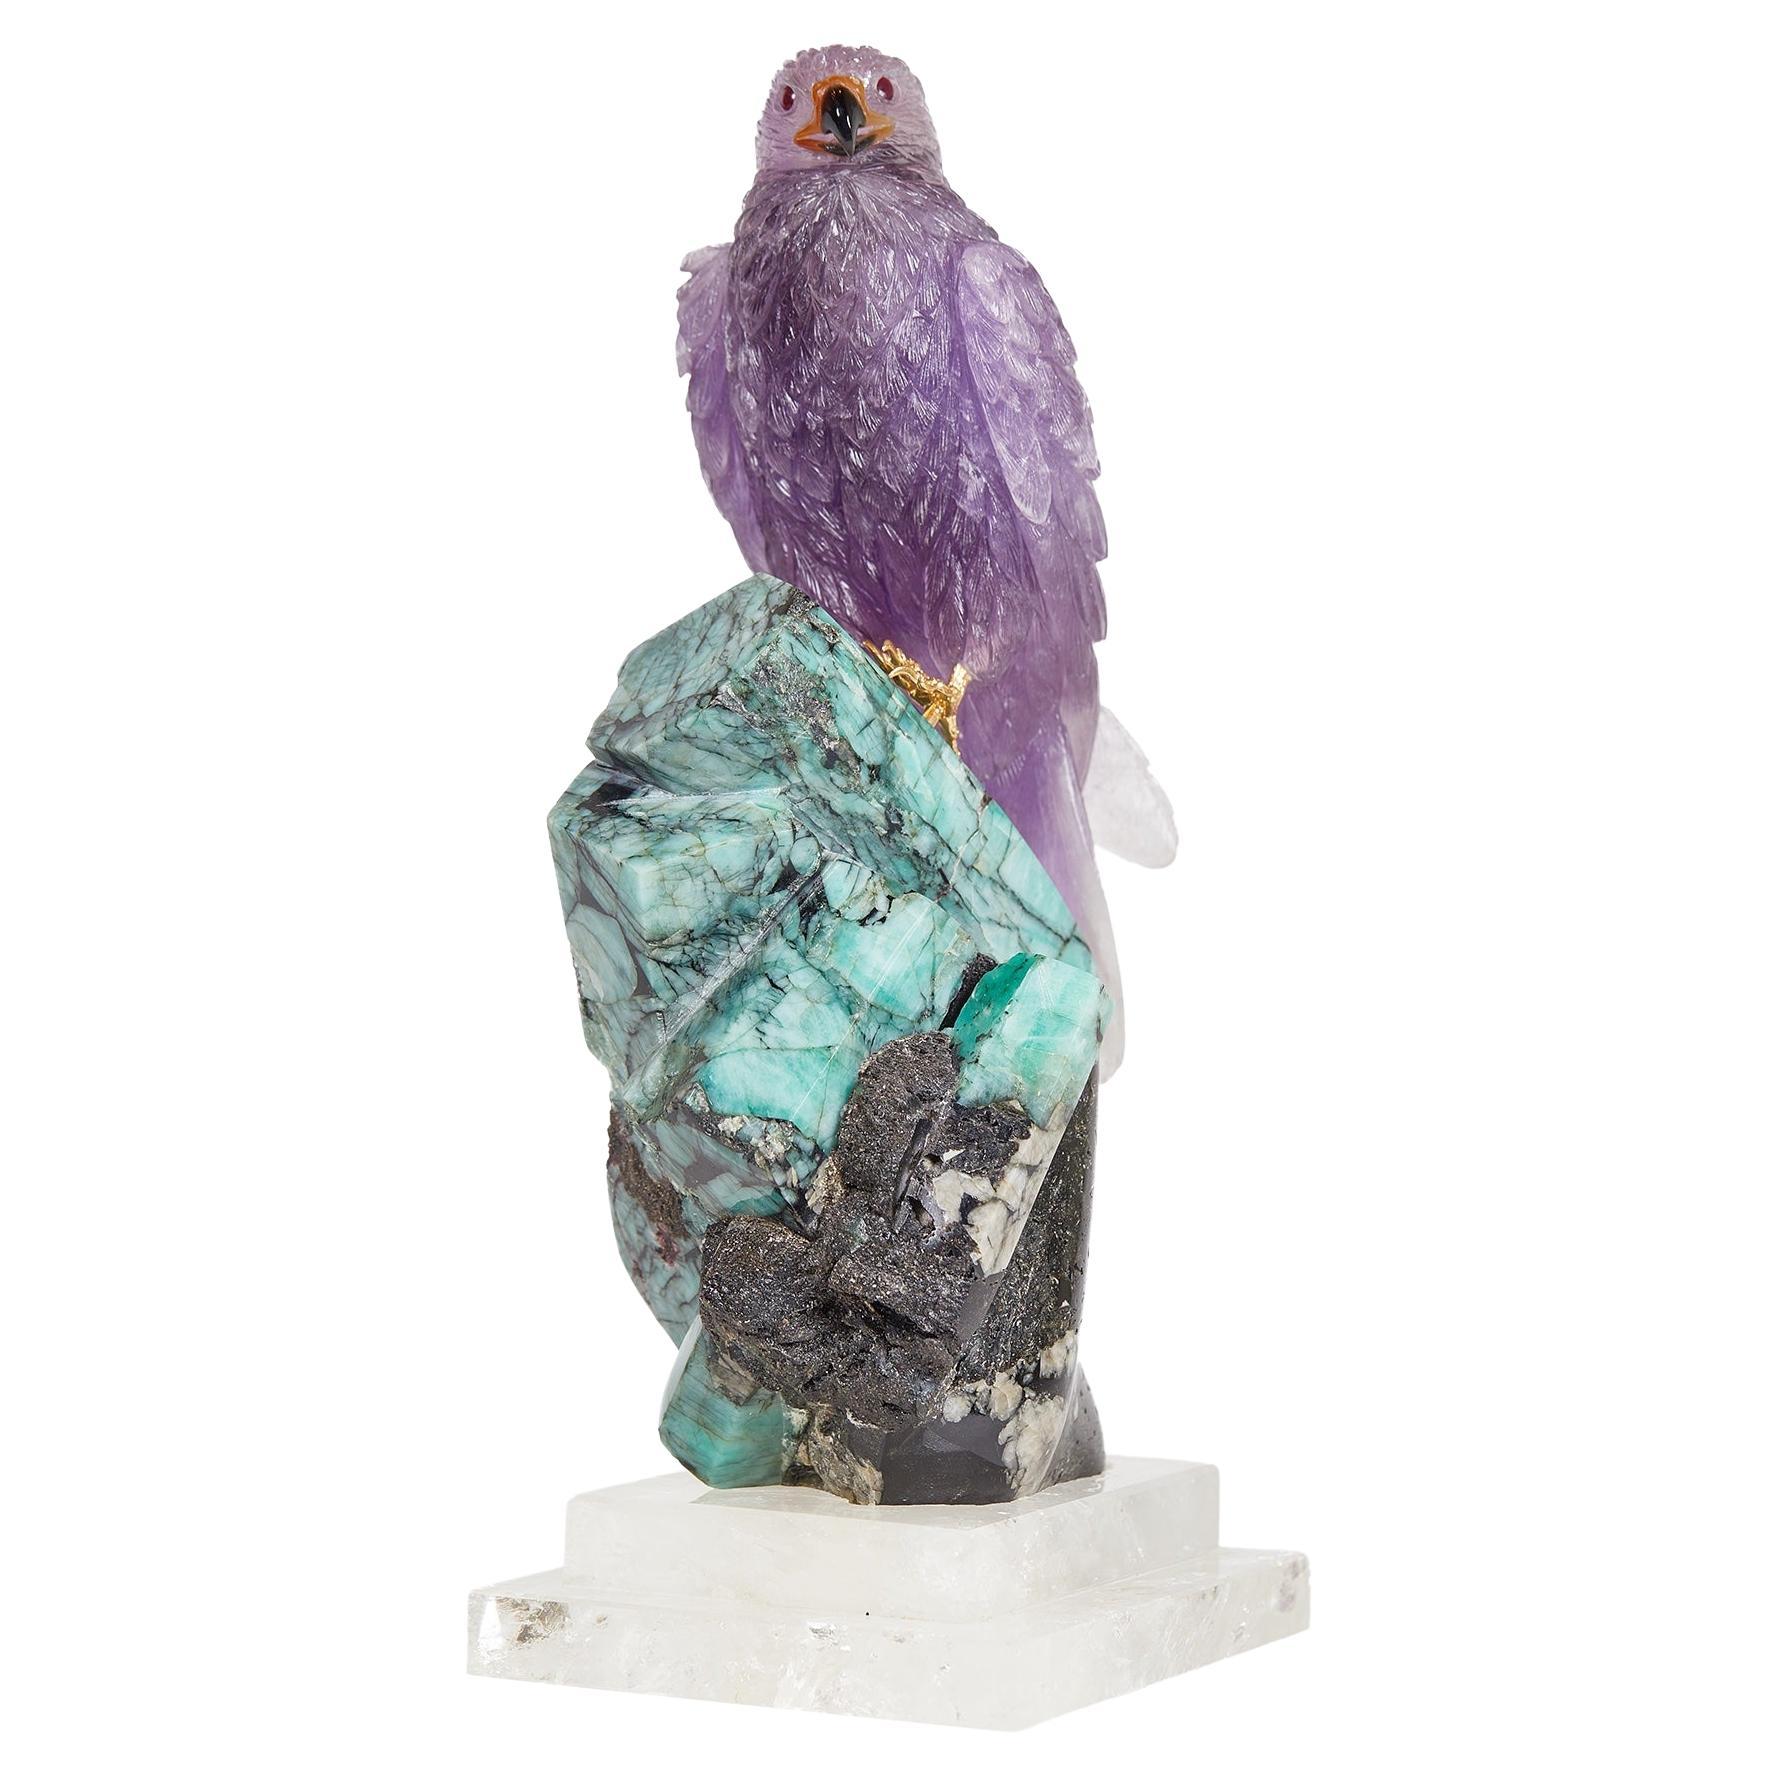 One-of-a-kind Carved Amethyst Falcon Sculpture